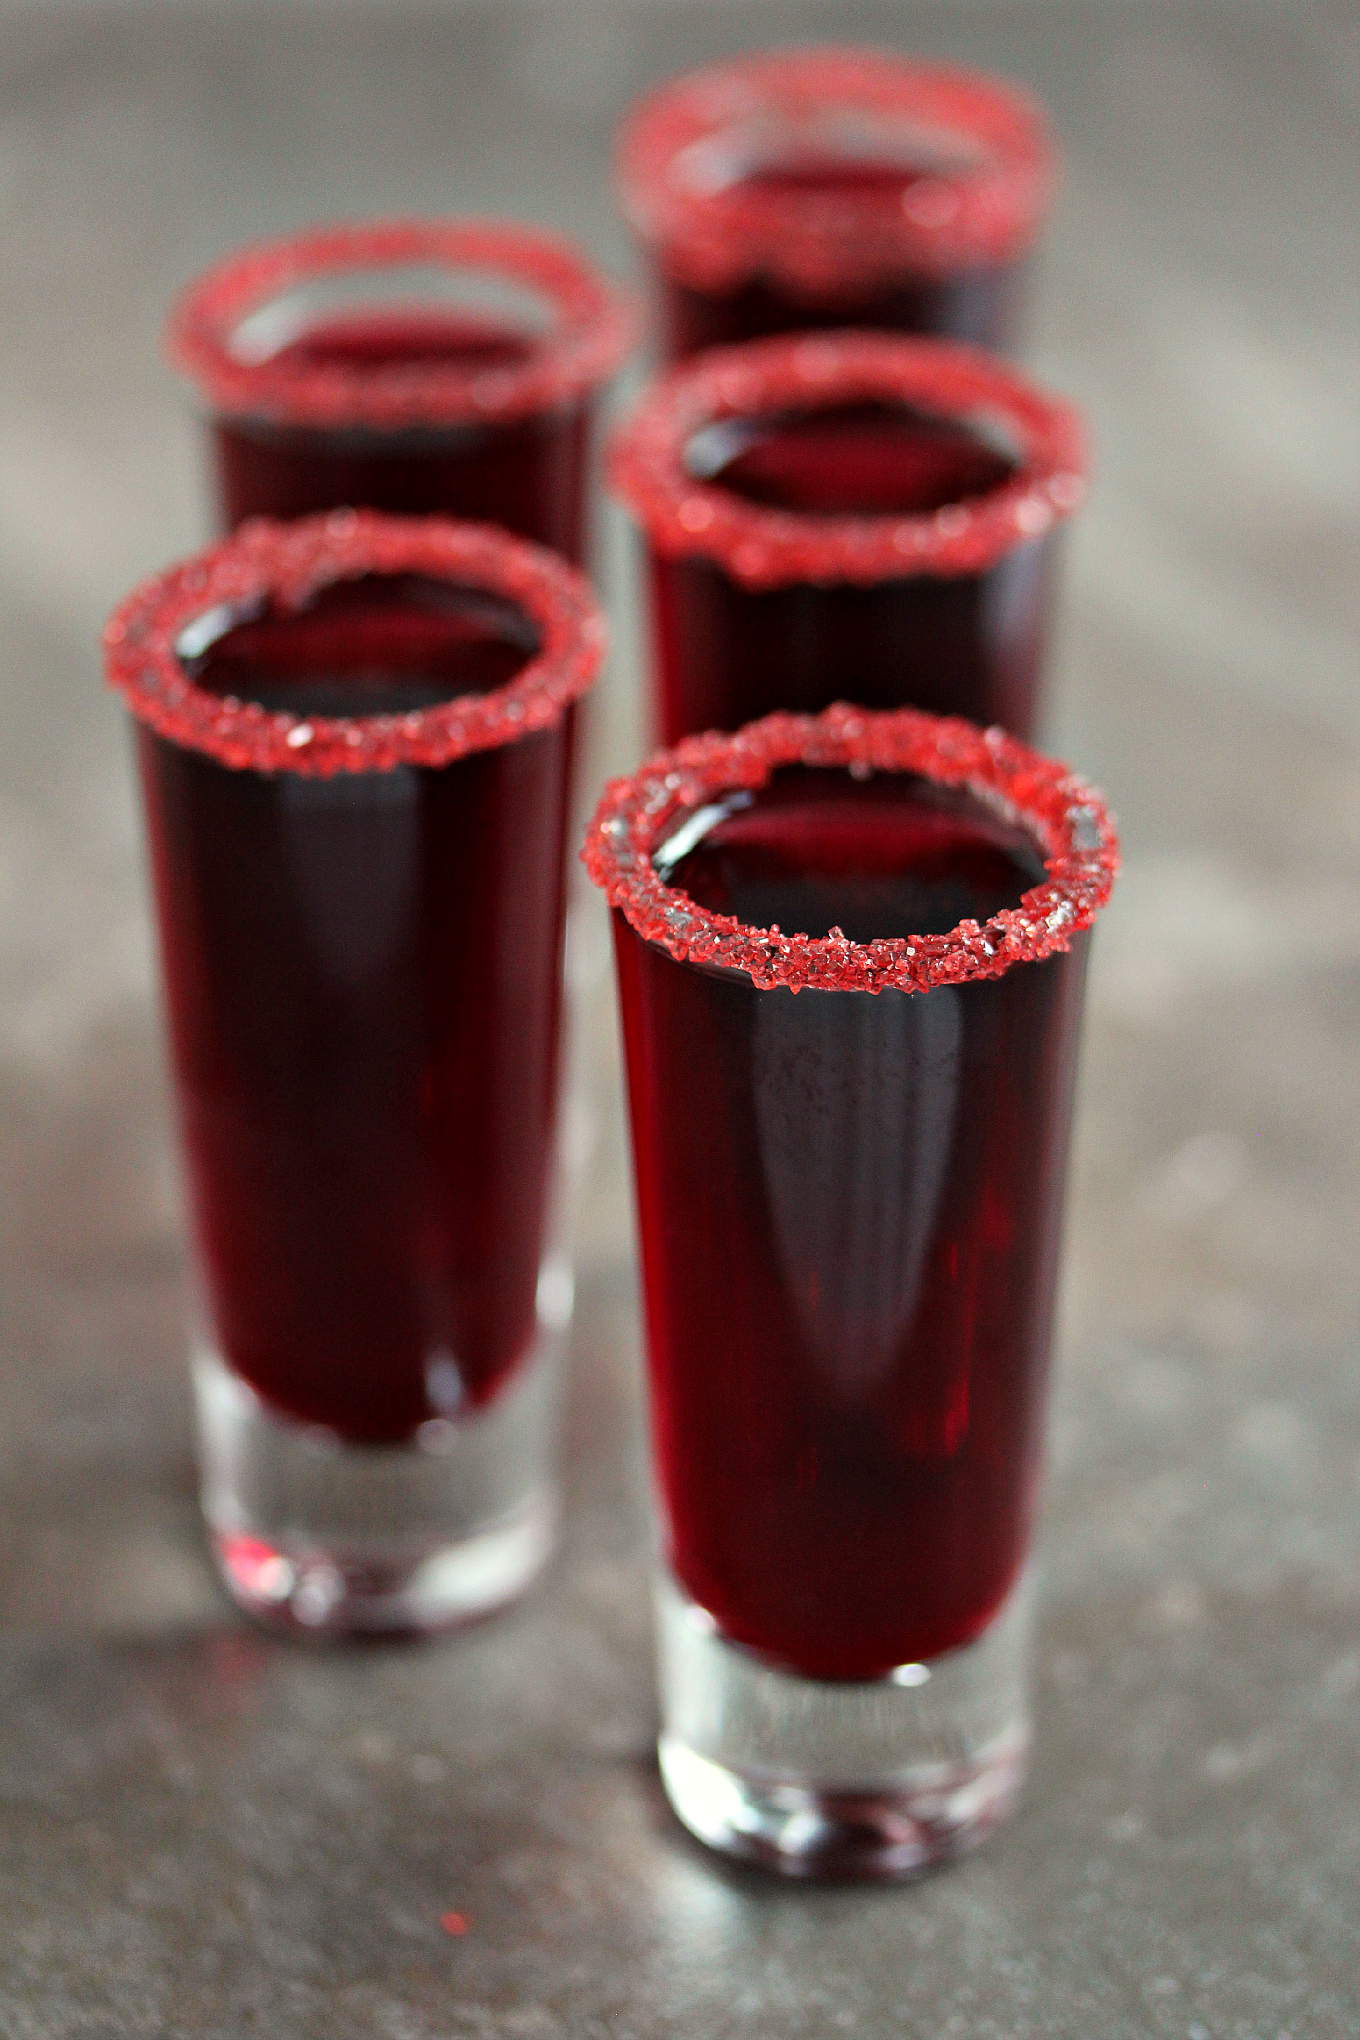 Walker Blood Sangria served in shot glasses with sugar around the rims.